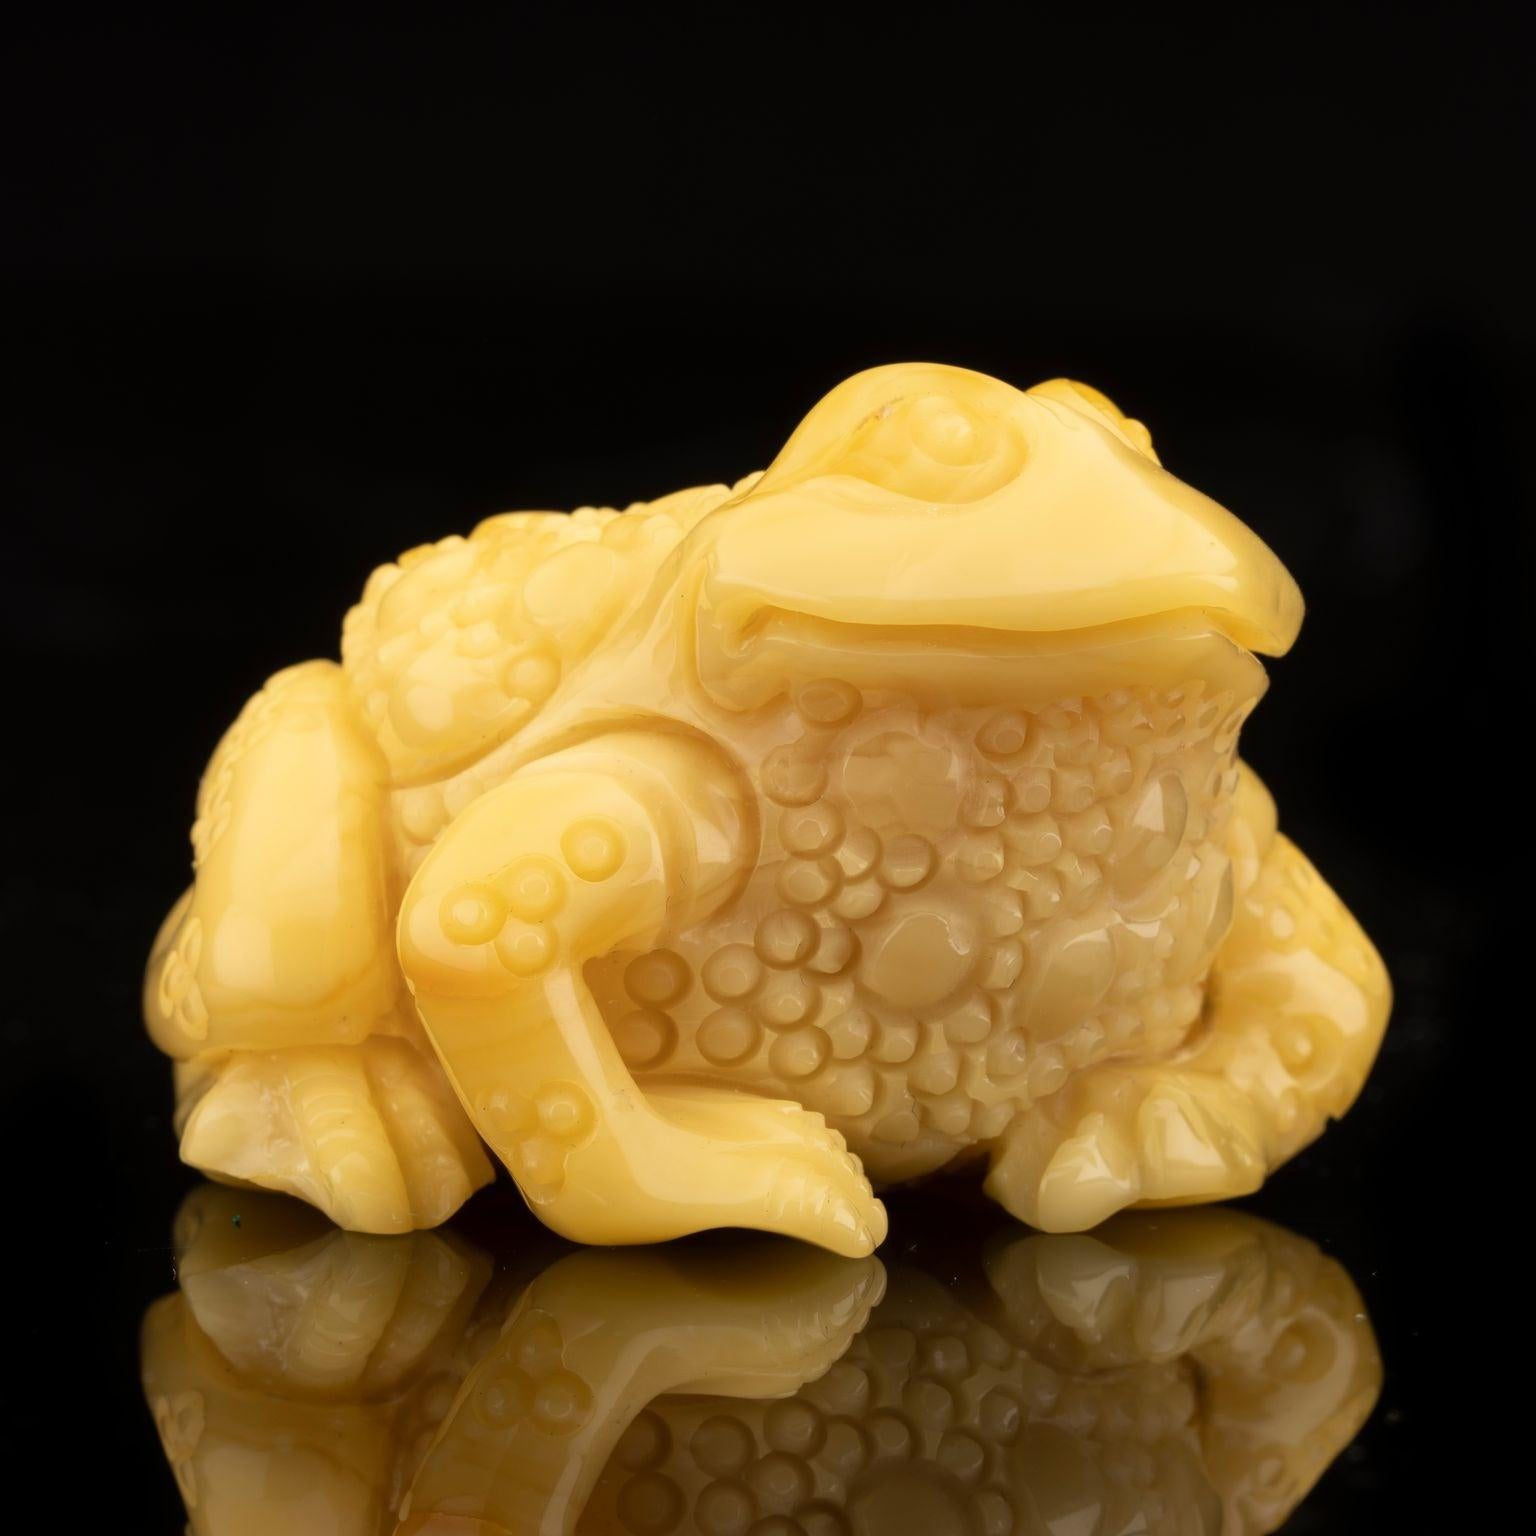 This intricately tooled butterscotch amber frog has been hand-carved from one solid piece of Baltic amber from Ukraine. Featuring exquisite detail, it will make a fantastic addition to your collection. The cube in the picture is one